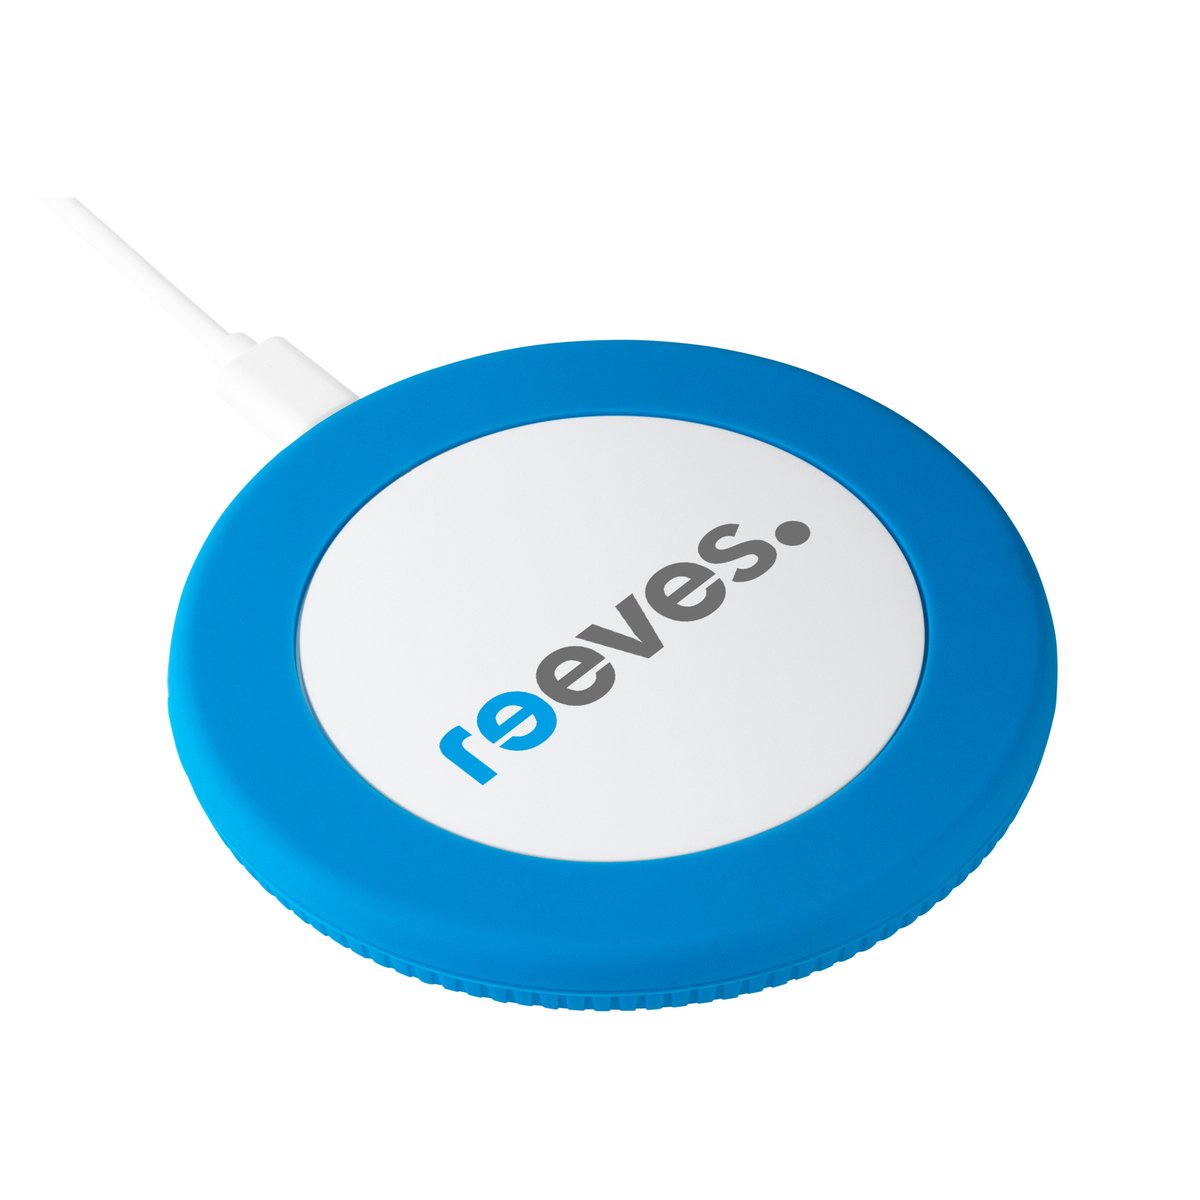 Wireless Charger REEVES-myMatola "reeves" white/blue 15 Watt branded sample